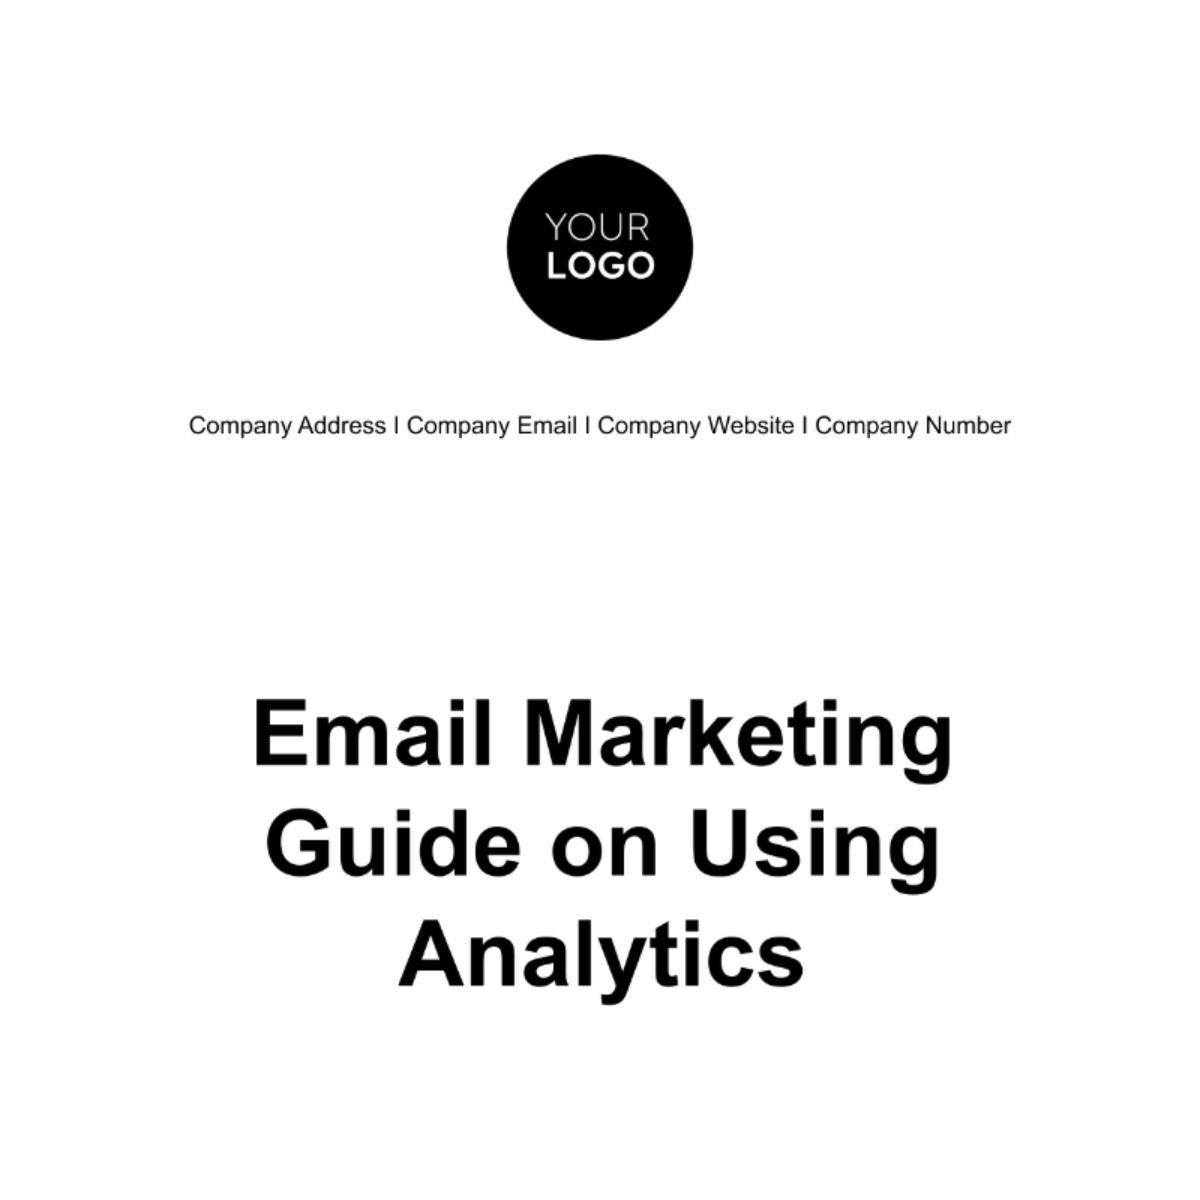 Email Marketing Guide on Using Analytics Template